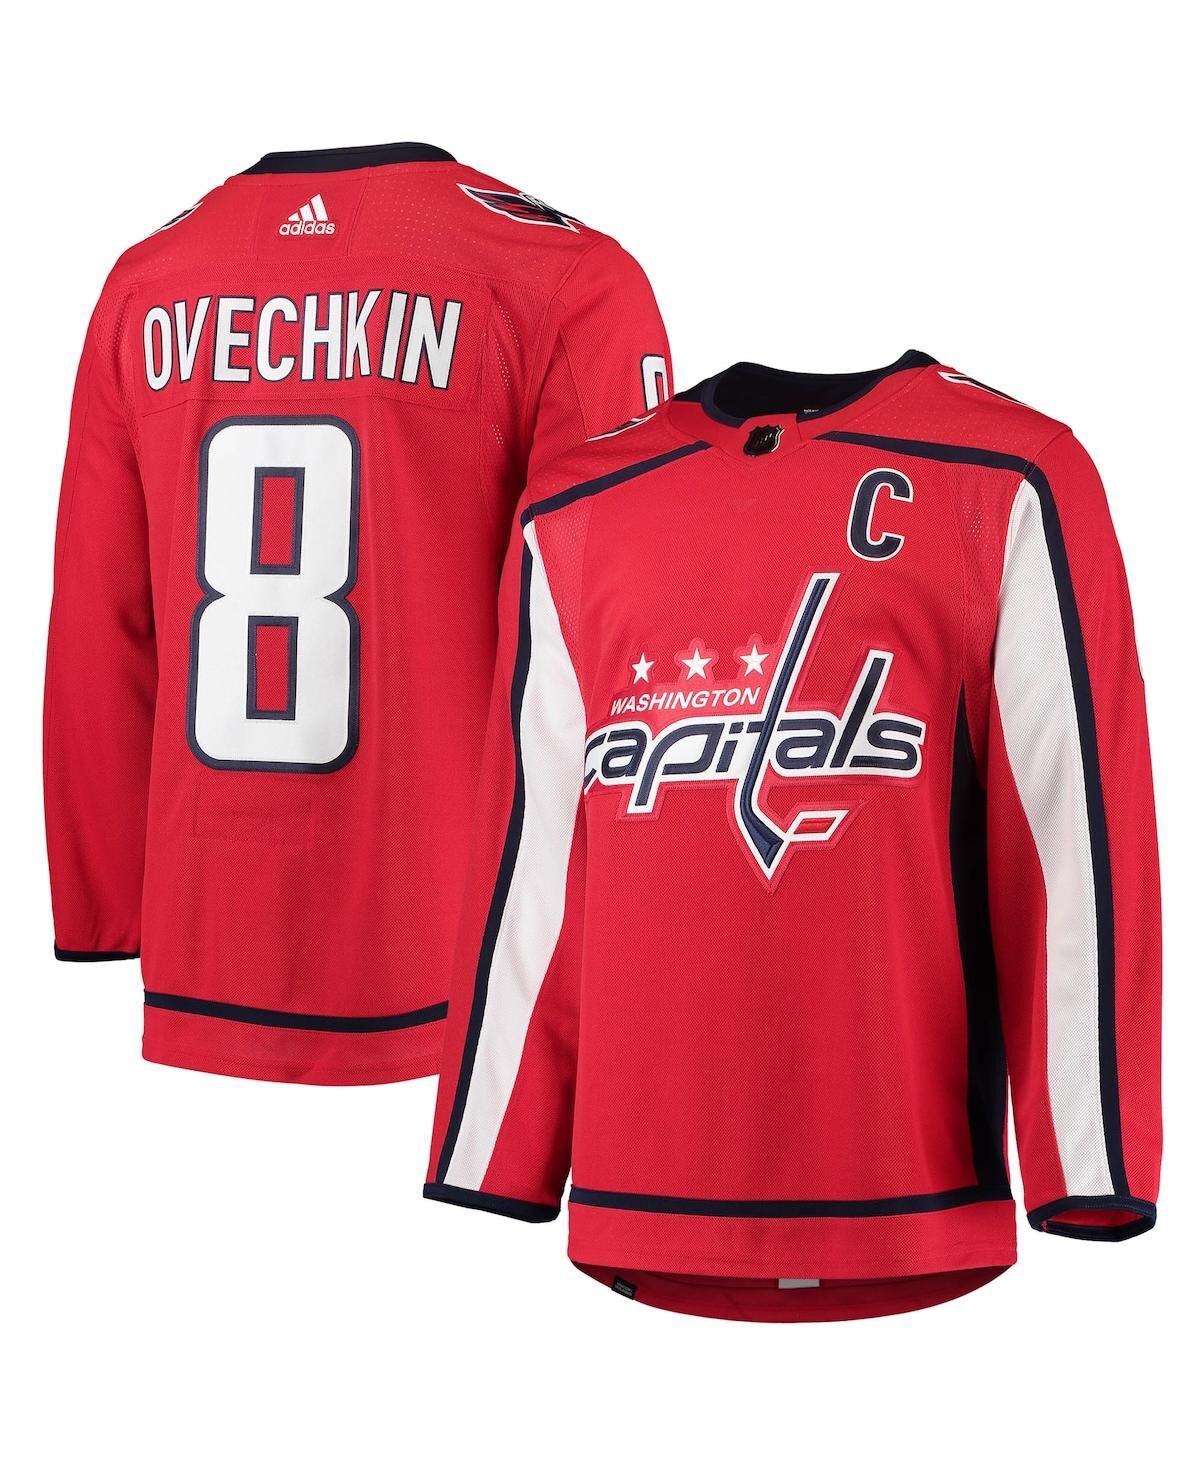 Adidas Men's adidas Alexander Ovechkin Red Washington Capitals Home Captain Patch Authentic Pro Player Jersey - Red